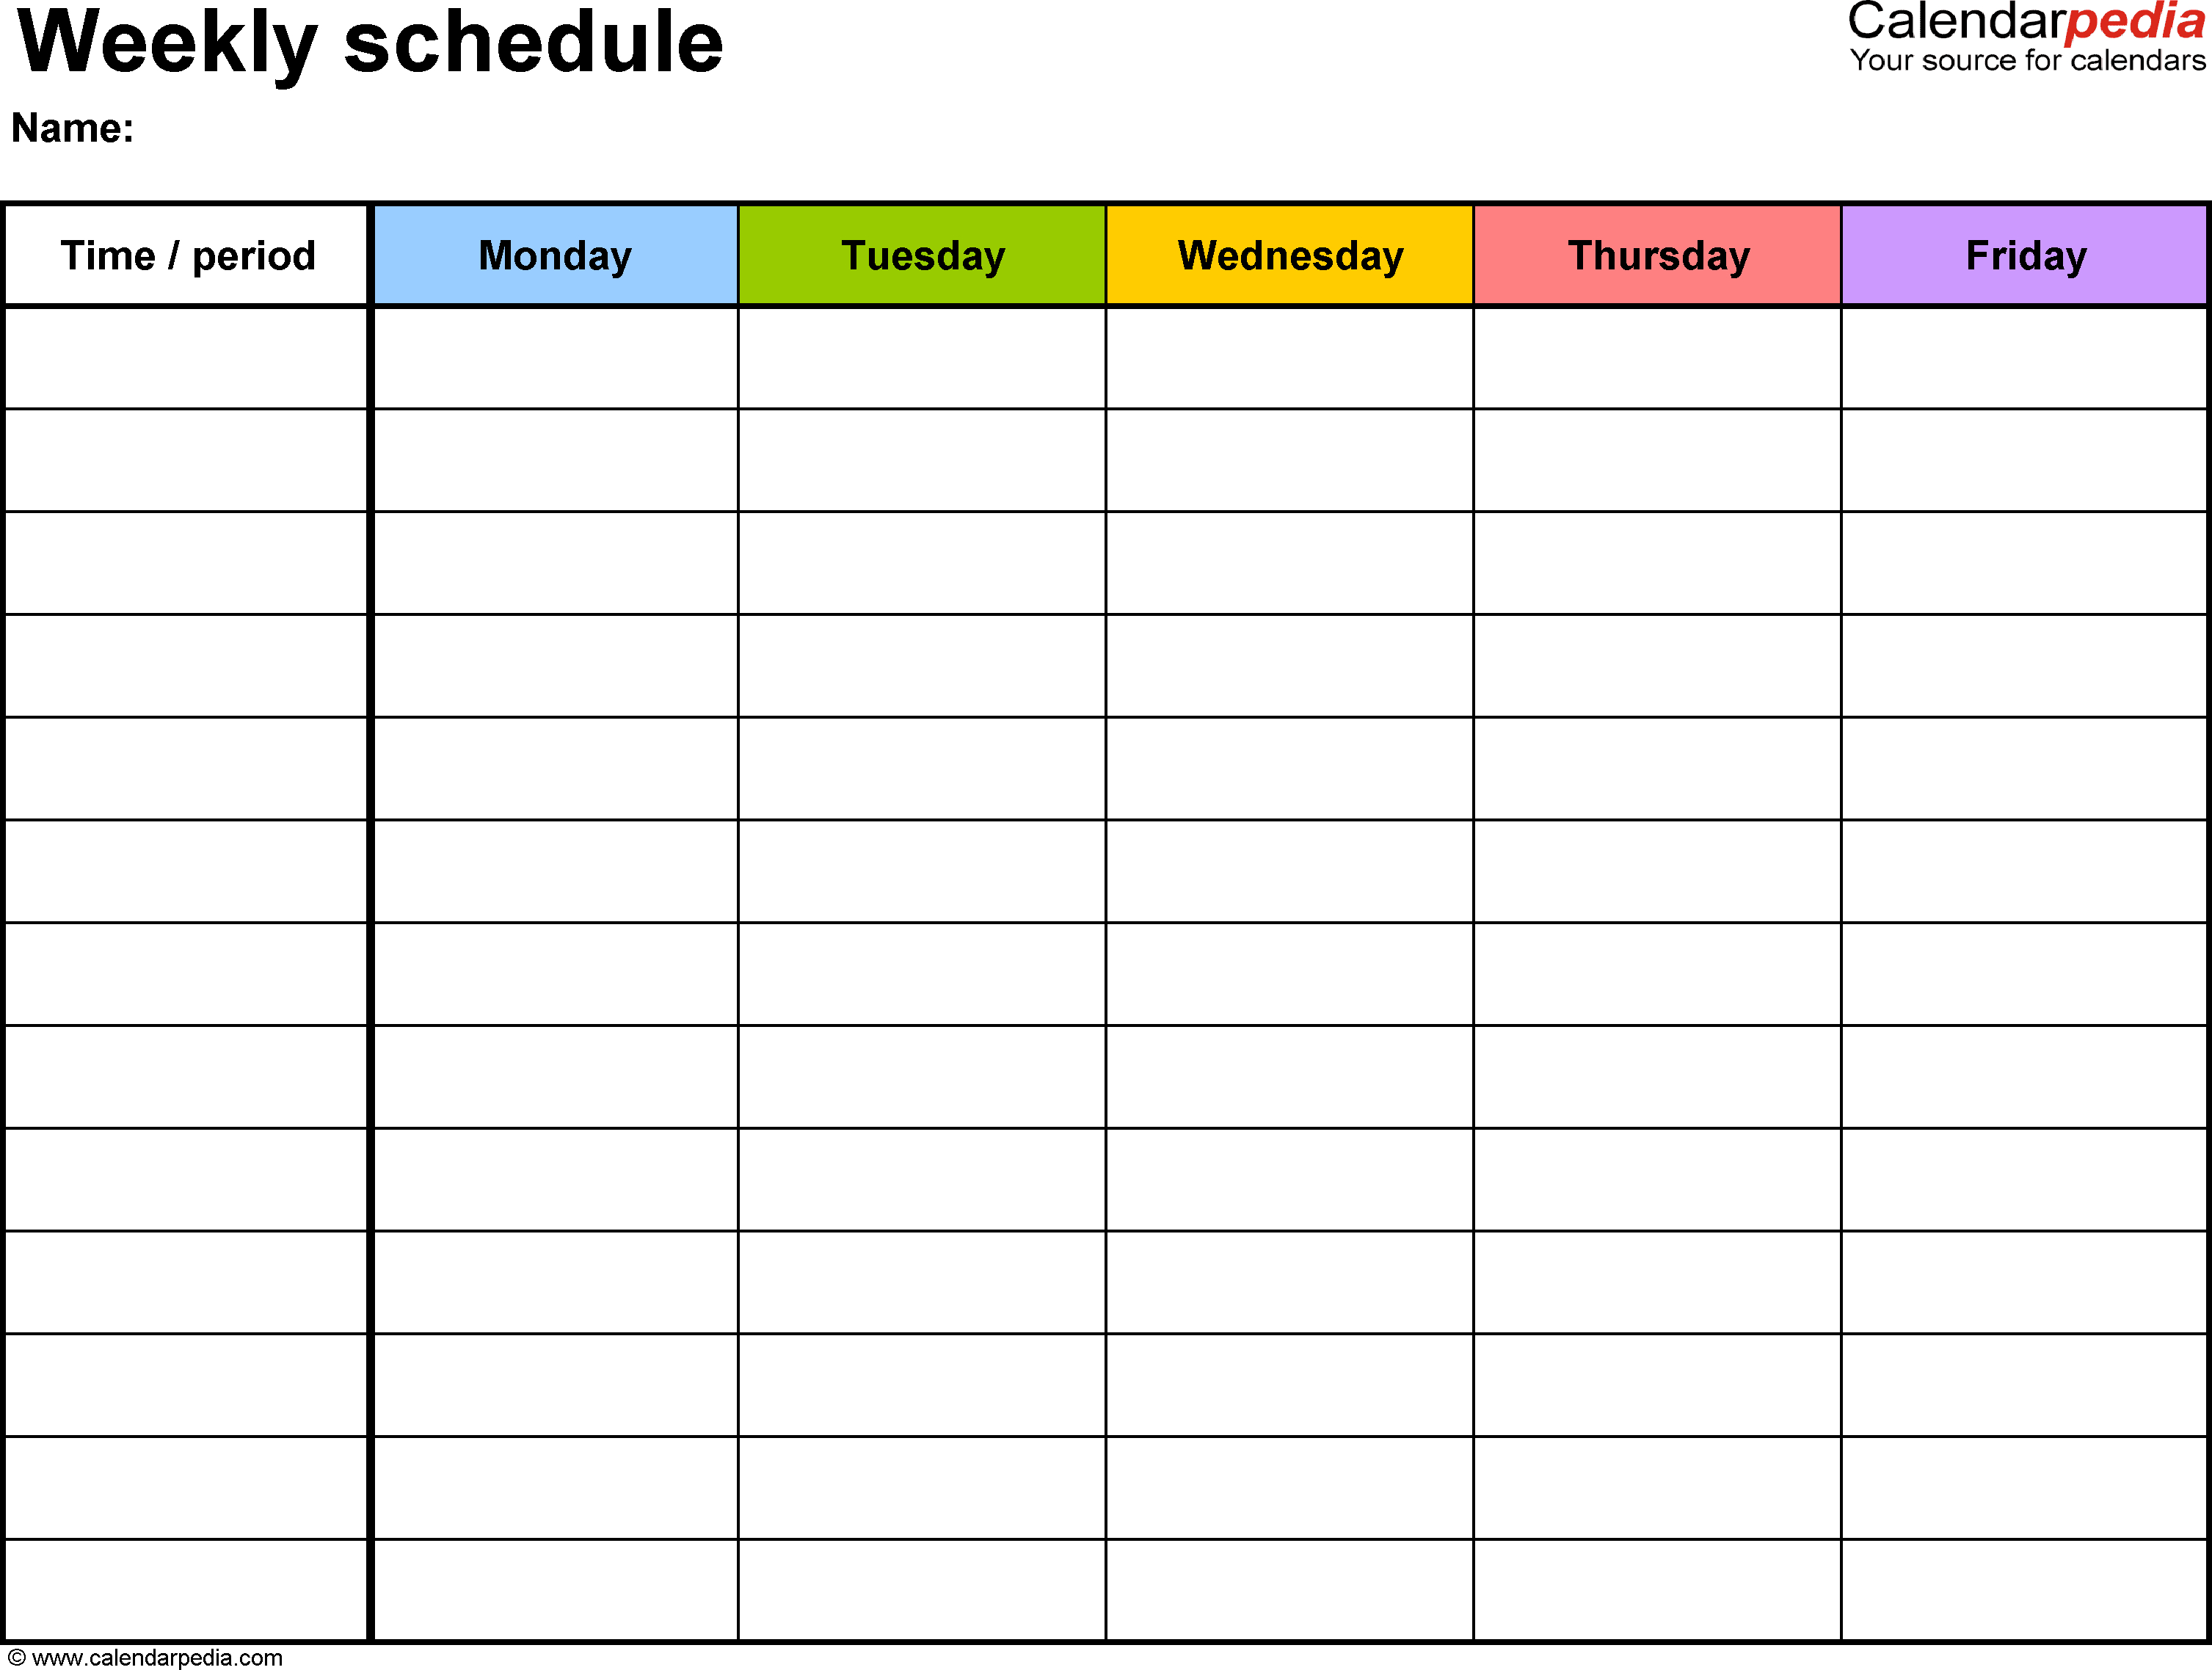 Printable Spreadsheets Made Easy with Free Weekly Schedule Templates For Excel  18 Templates